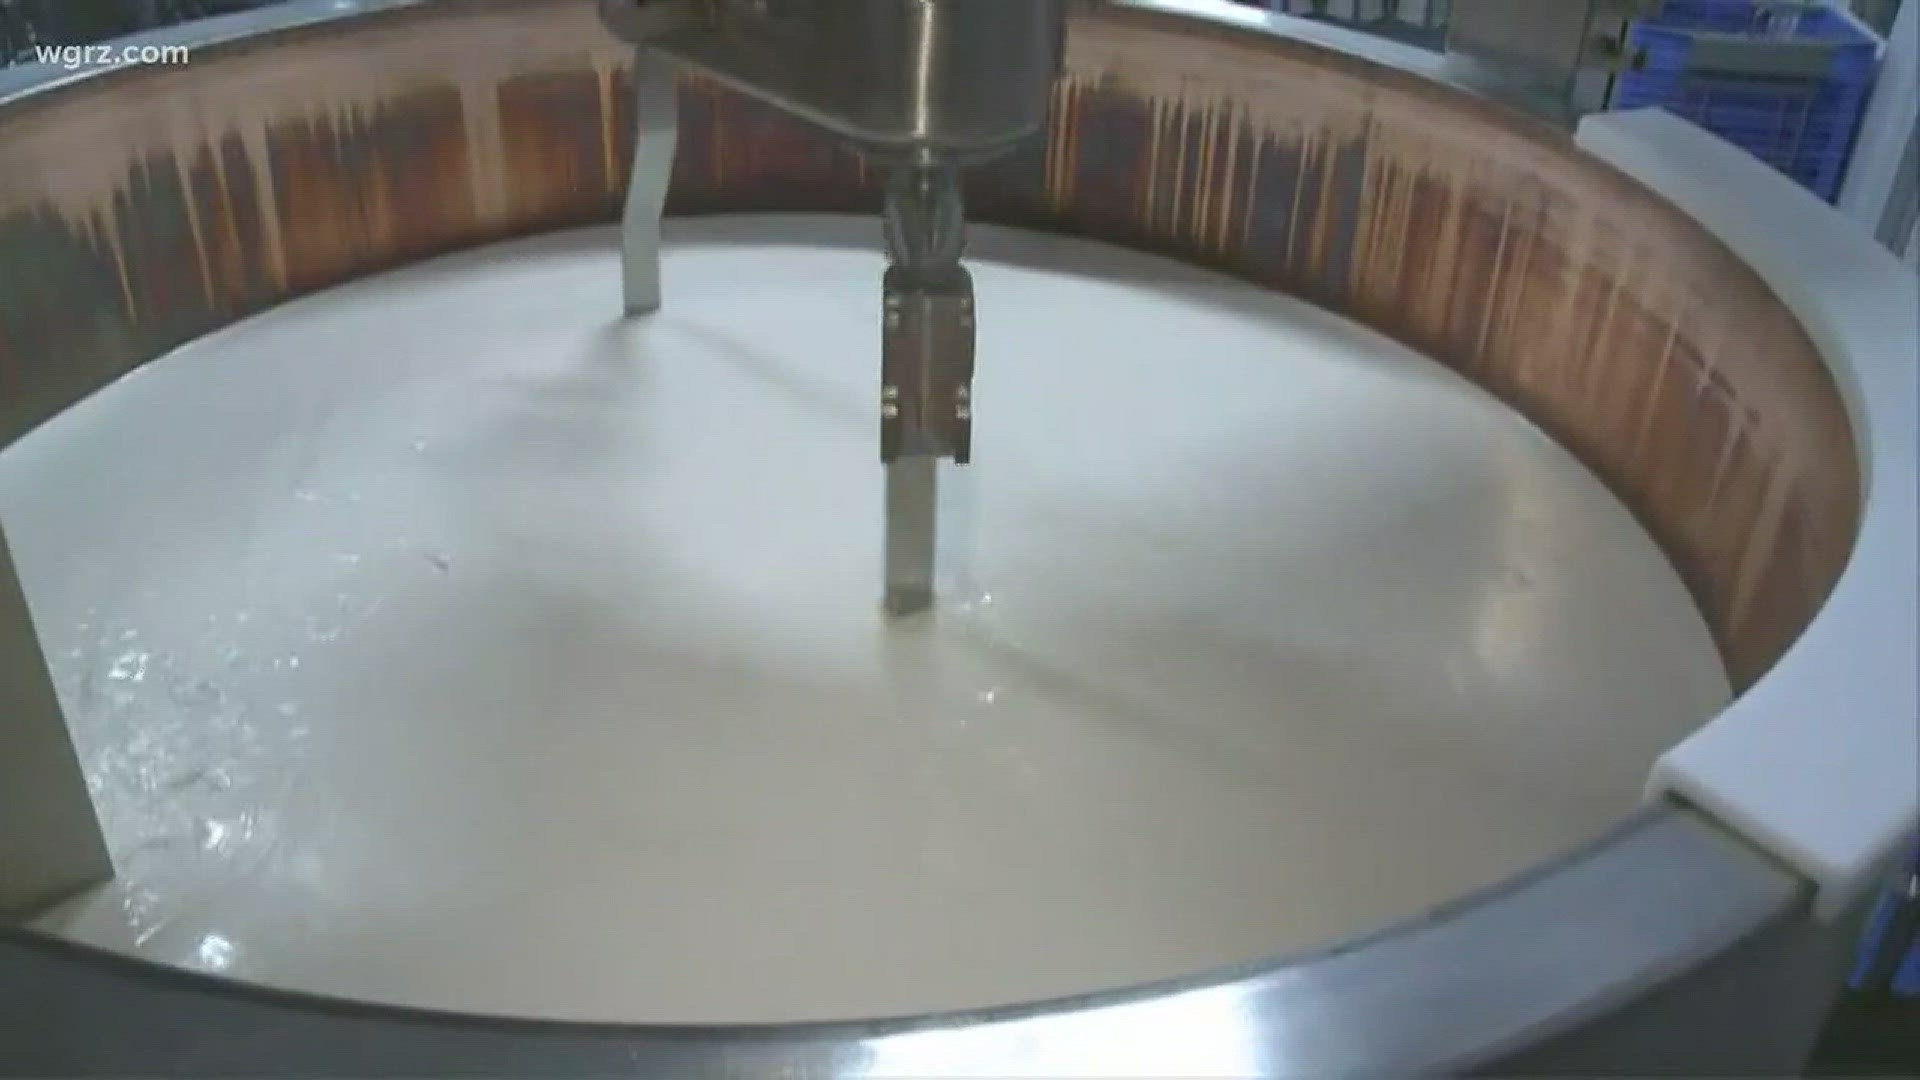 Perry Cheese Maker Uses Milk From Their Own Cows